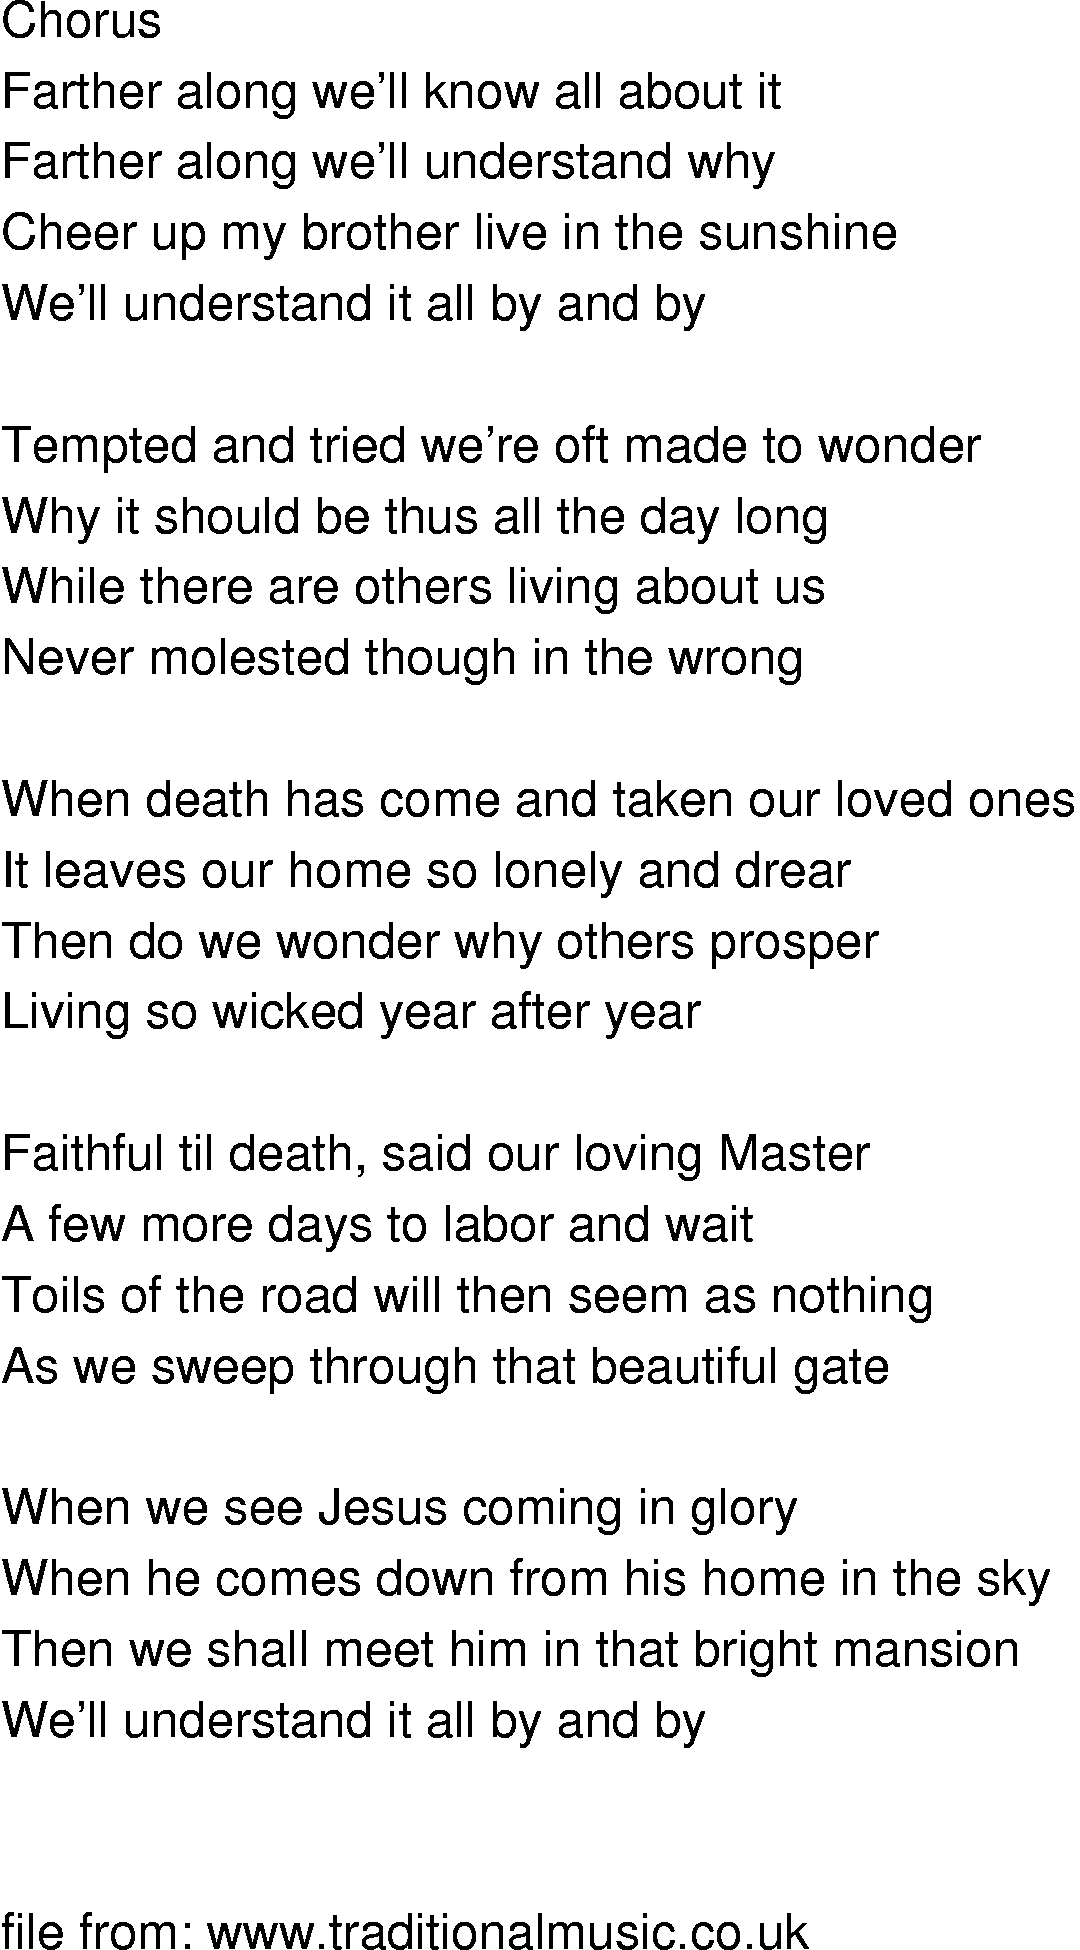 Old-Time Song Lyrics - Farther Along